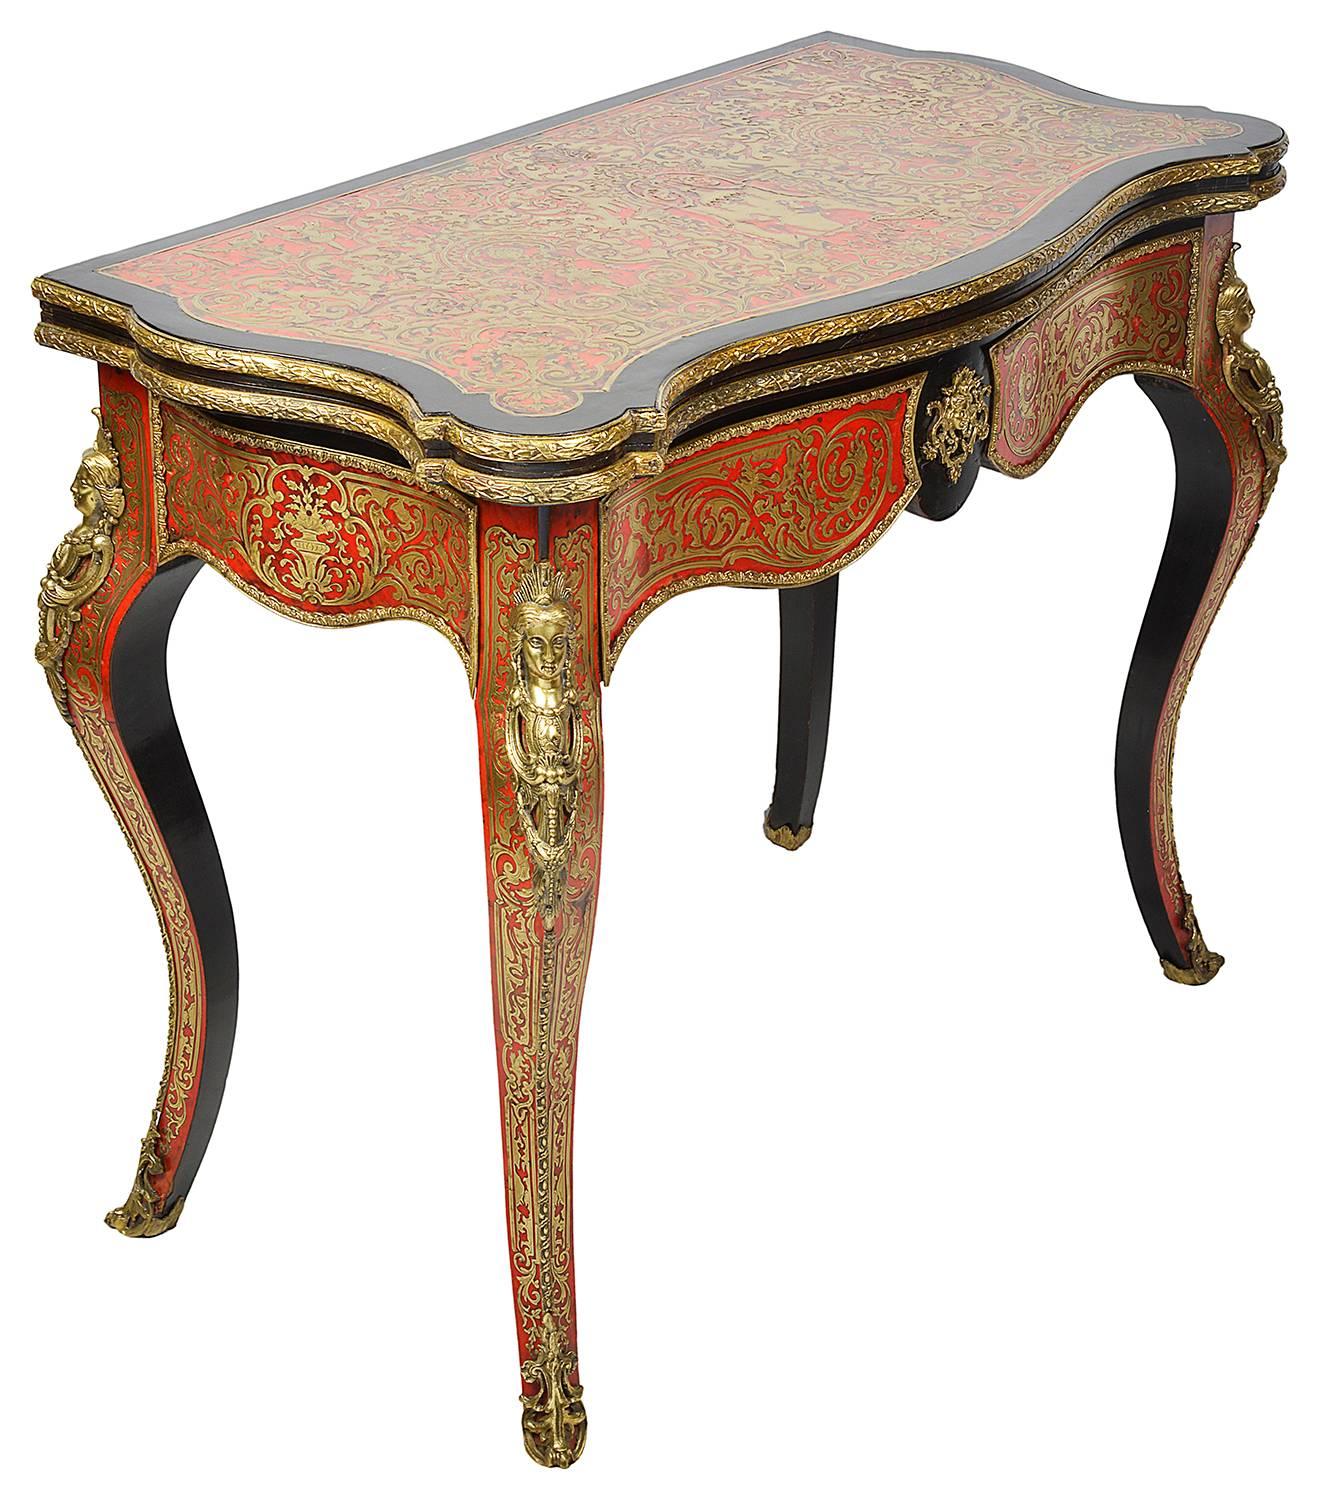 A good quality 19th century French Boulle inlaid card table, having gilded ormolu mounts, classical scrolling inlay with figures in the centre, opening to reveal a green baize card playing surface. Raised on elegant cabriole legs, terminating in